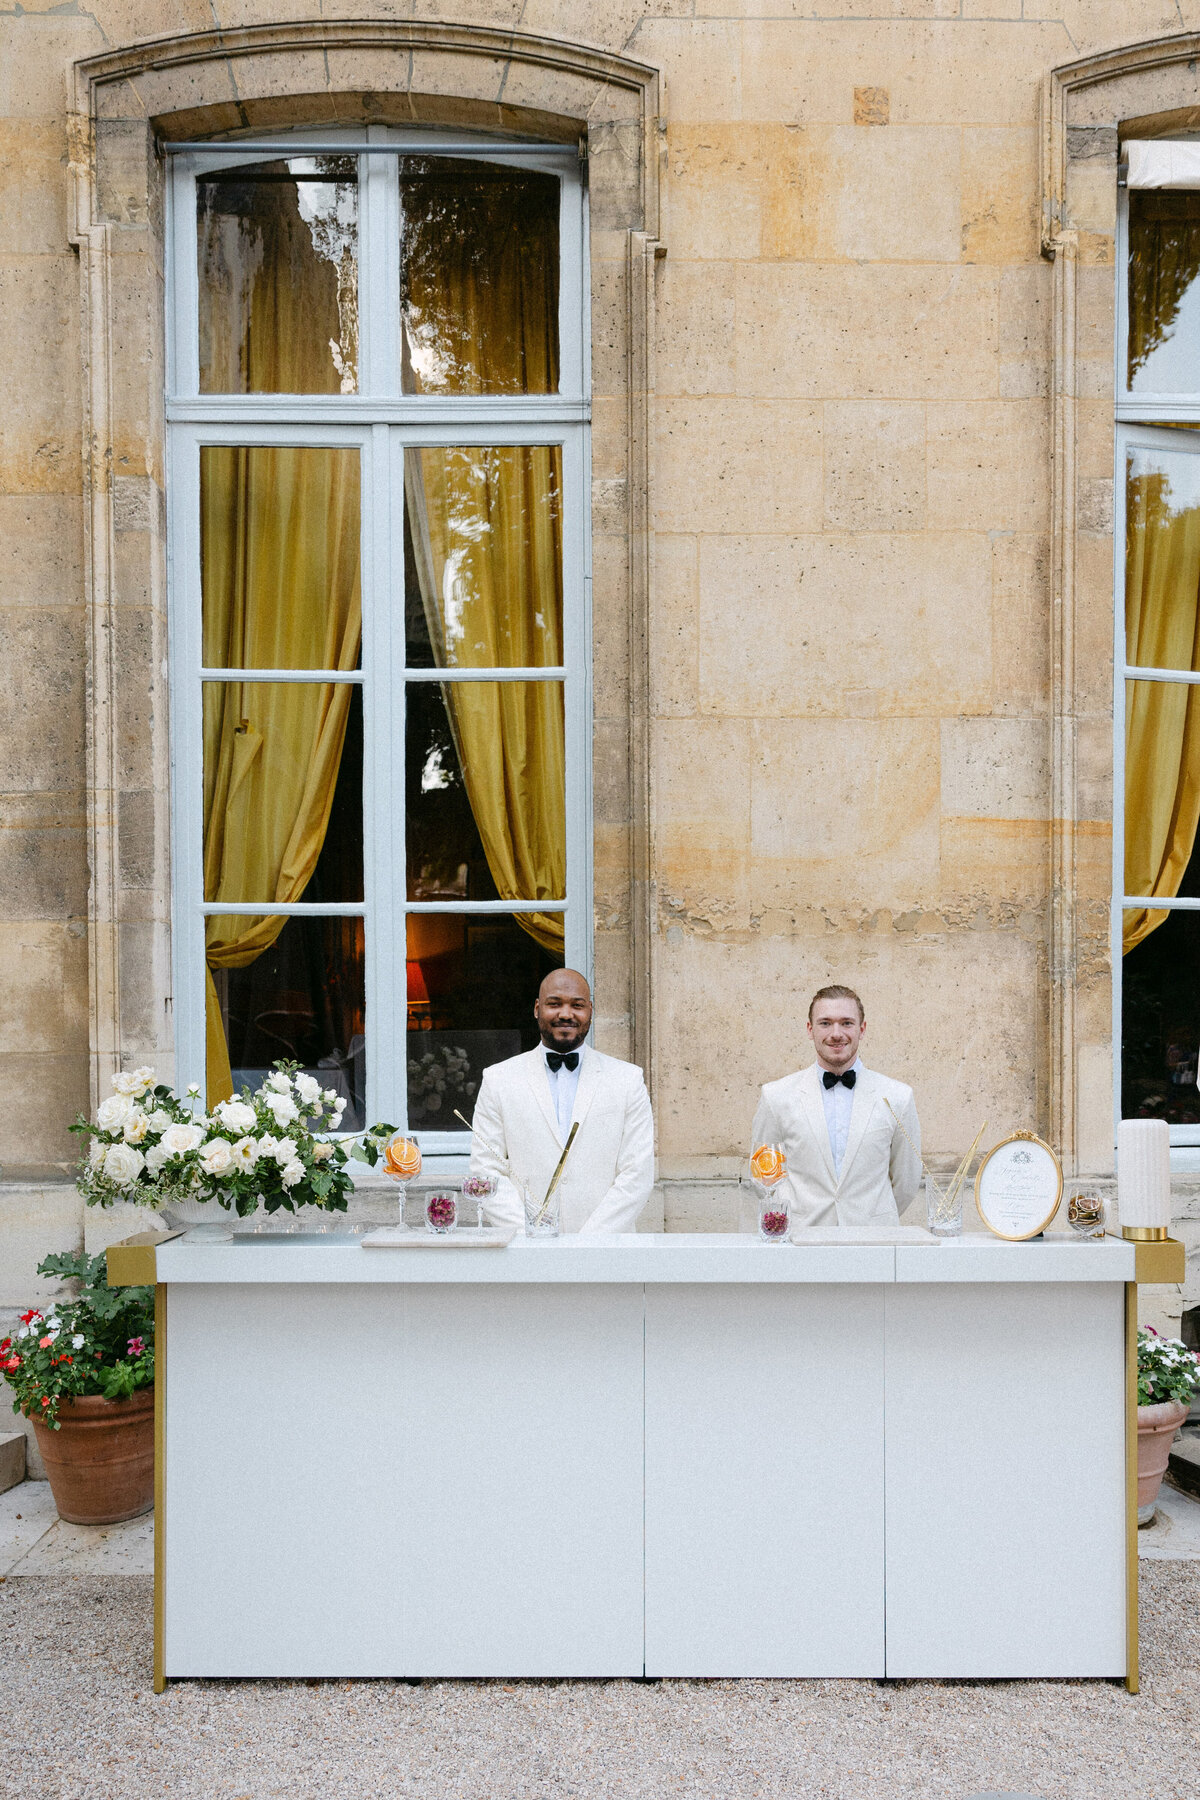 Jennifer Fox Weddings English speaking wedding planning & design agency in France crafting refined and bespoke weddings and celebrations Provence, Paris and destination wd717